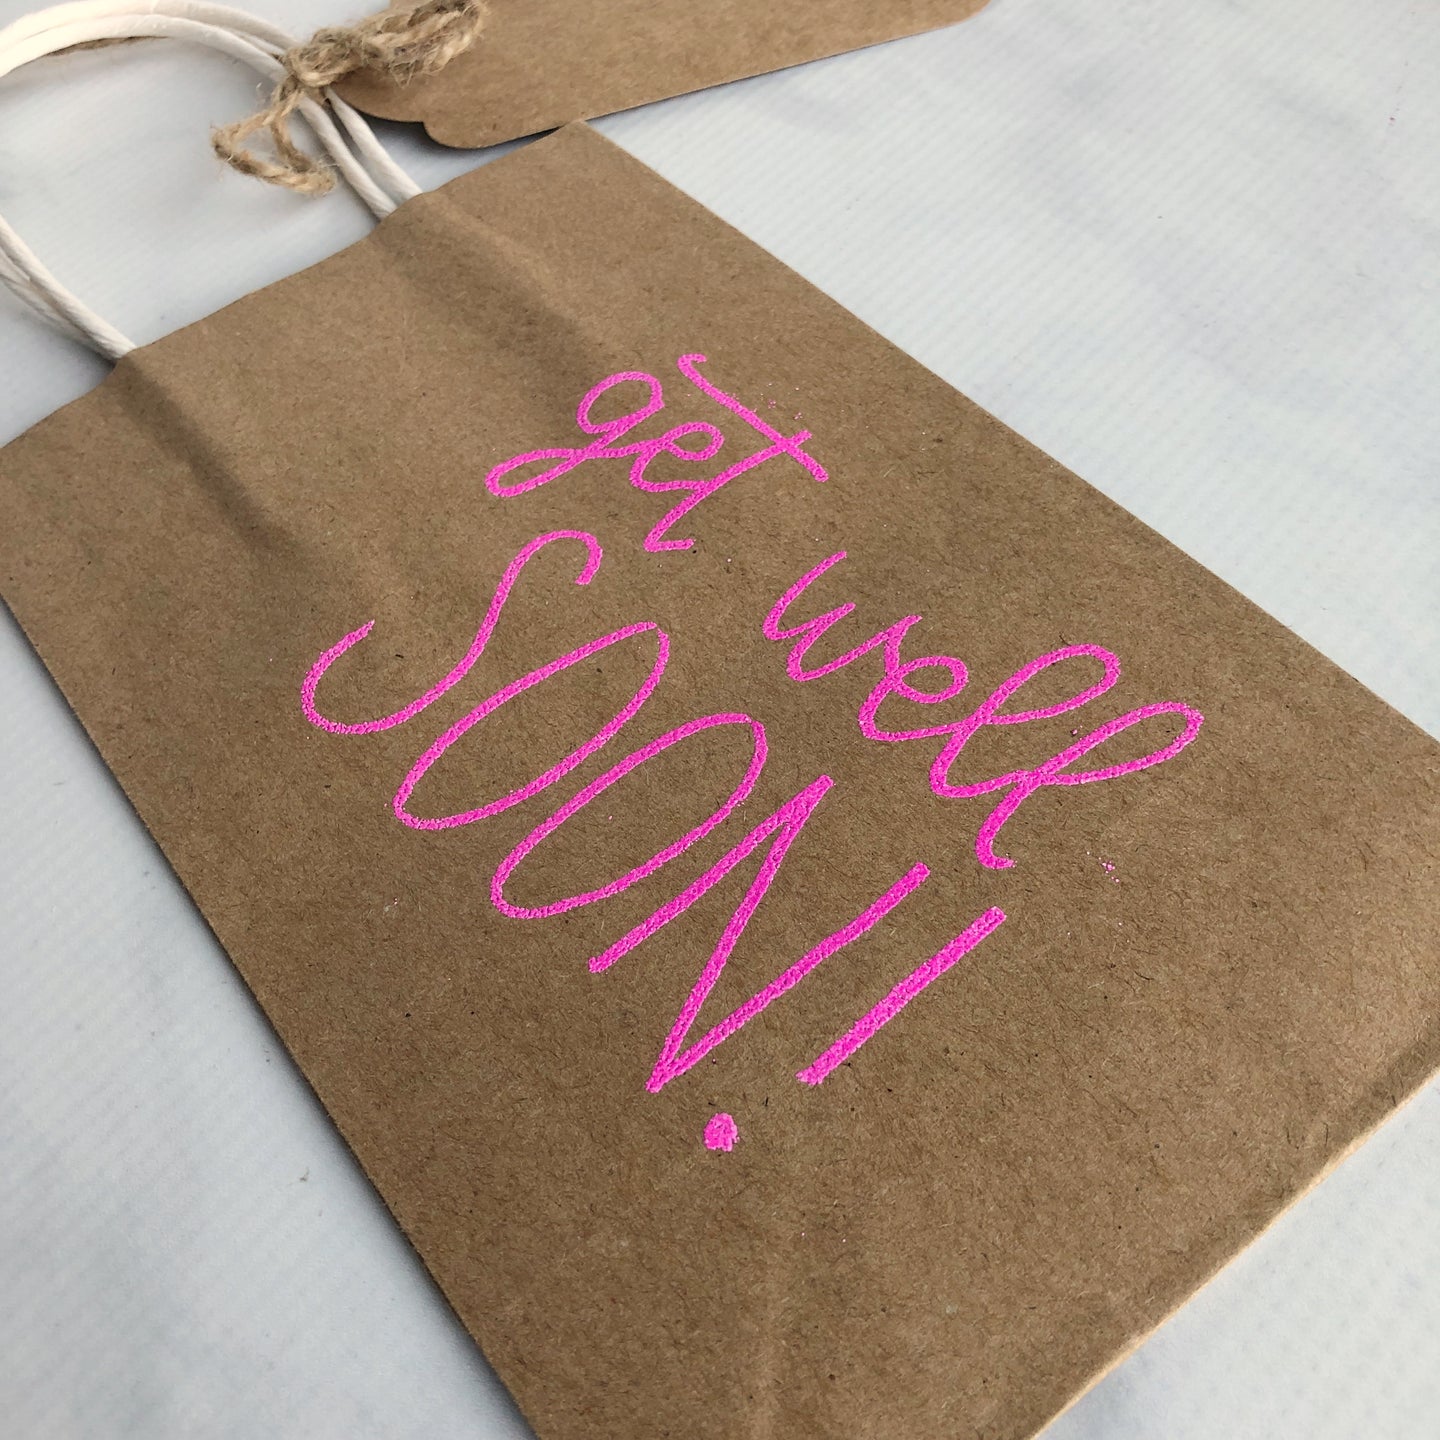 Small Hand-lettered Gift Bags